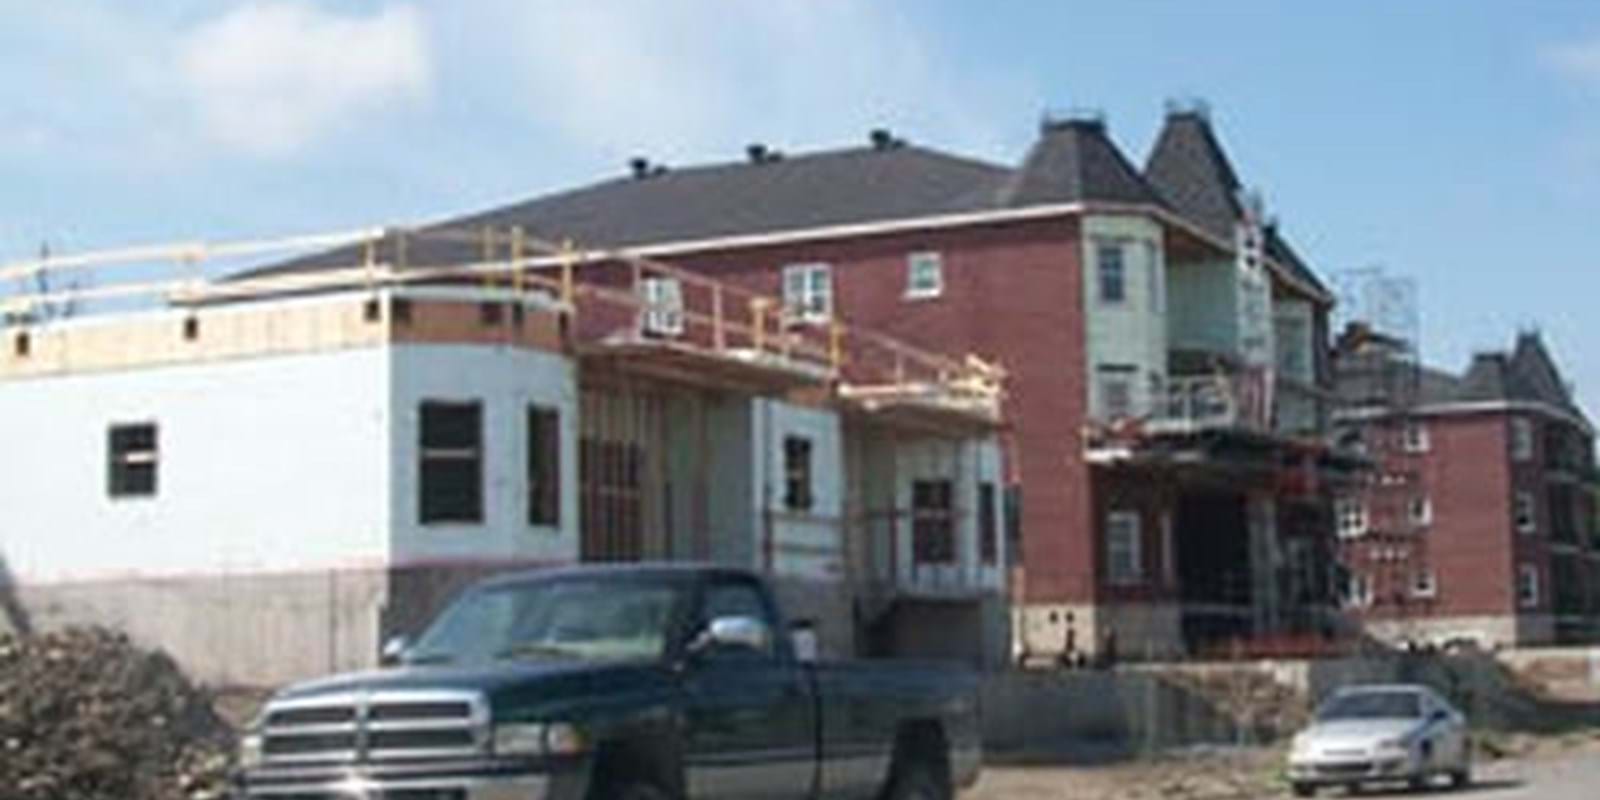 Quebec  Residential Construction Down Significantly in July